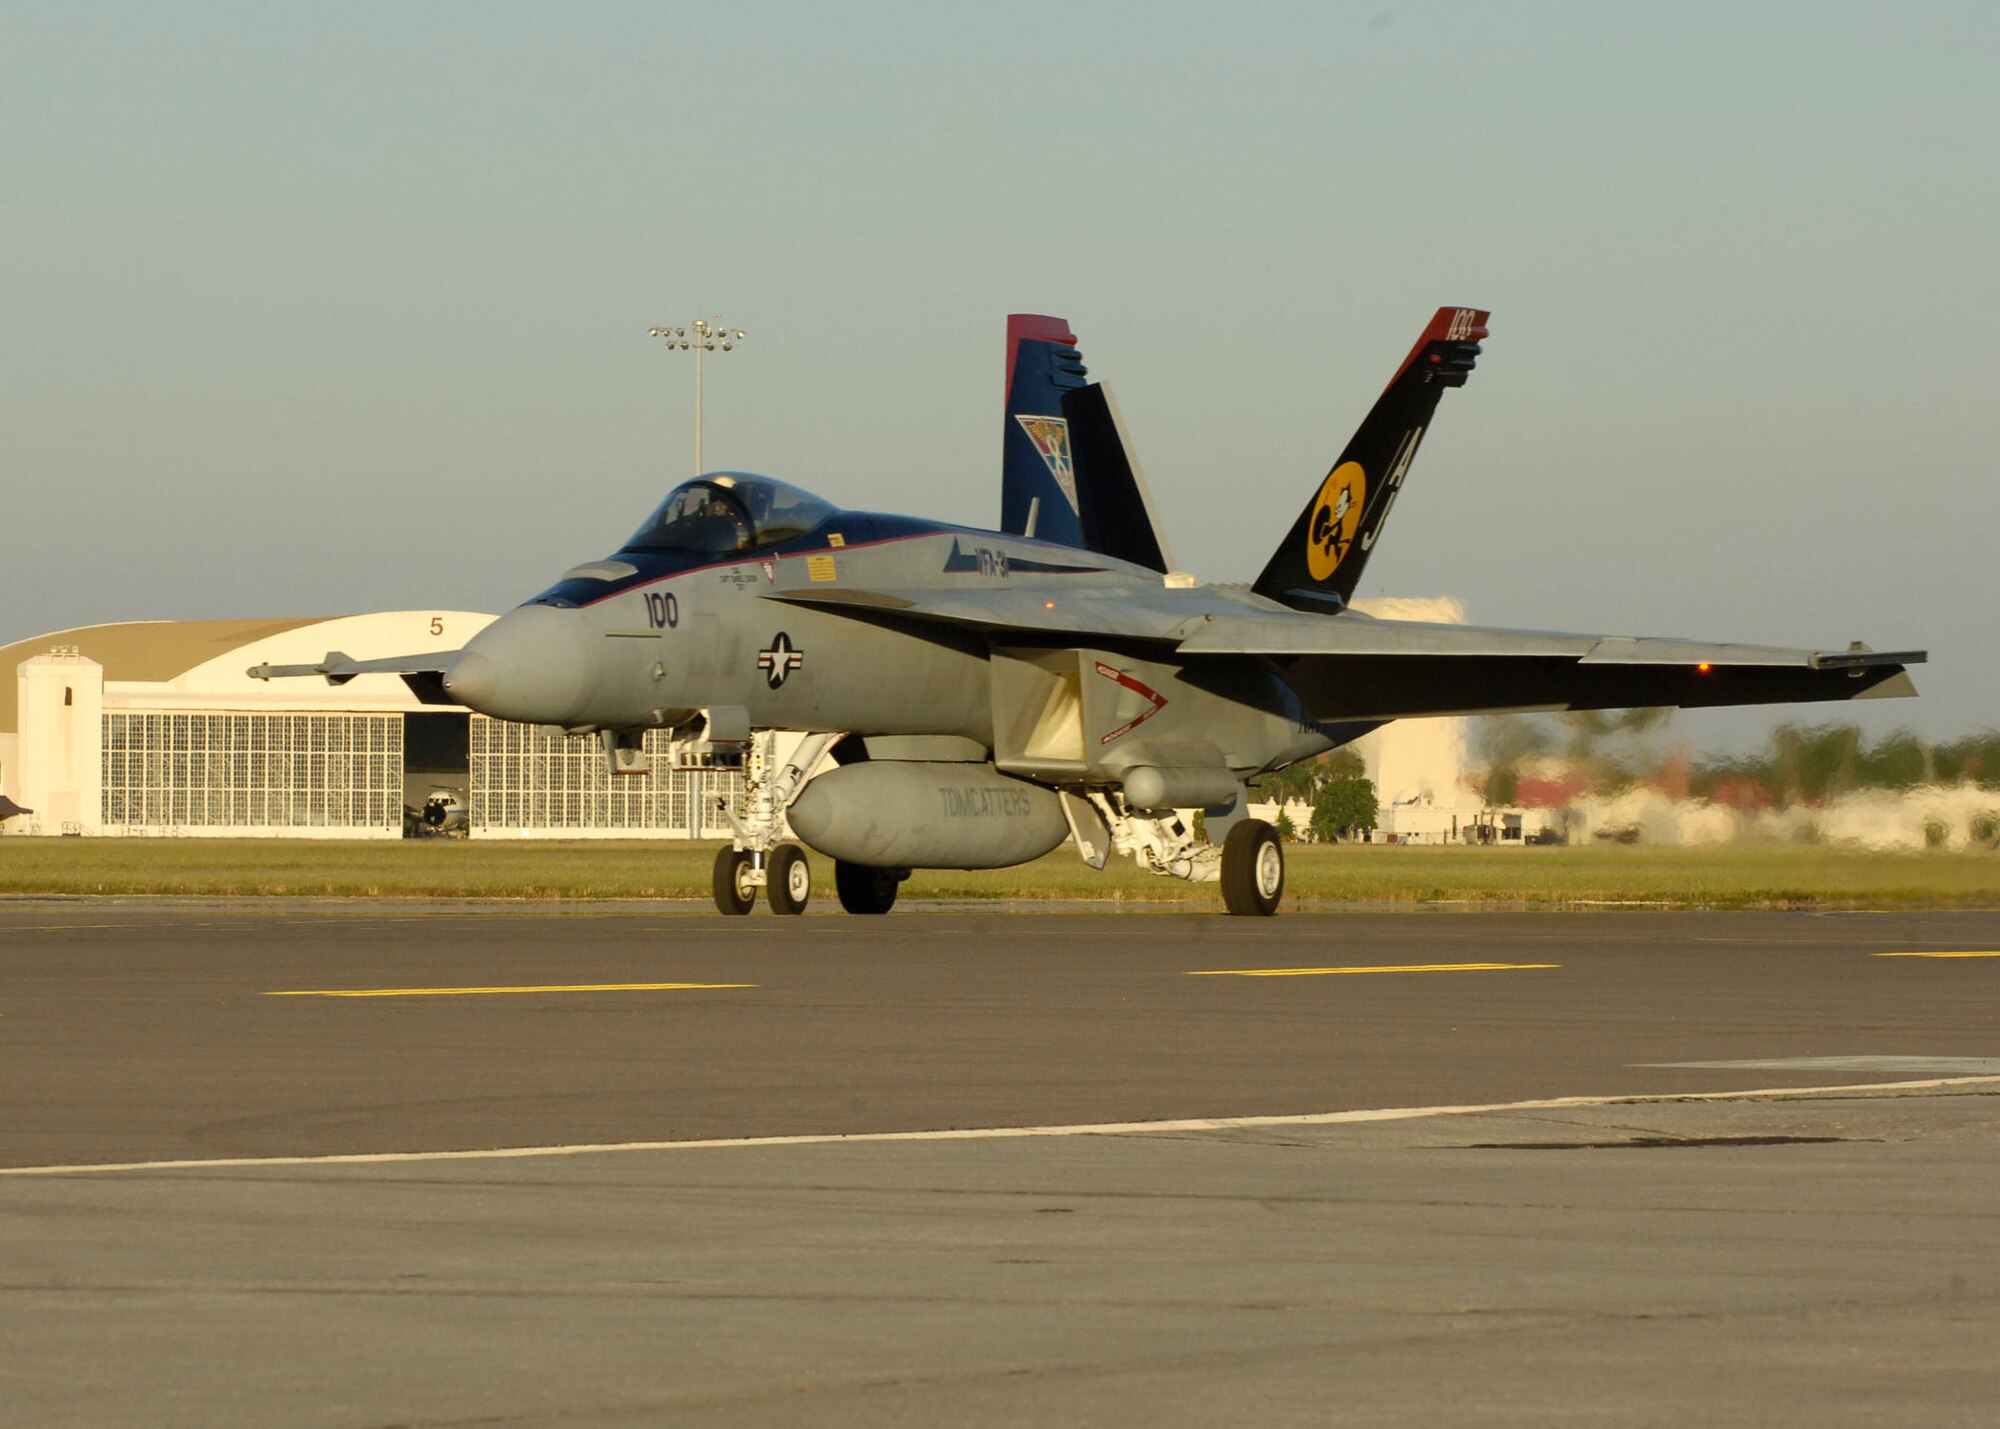 An F/A-18 Hornet taxies towards the runway at MacDill AFB Fla. in support of exercise Atlantic Strike VI; a U.S. Central Command Air Forces-sponsored exercise focusing on urban close air support operations. (U.S. Air Force Photo by Airman 1st Class Stephenie Wade)